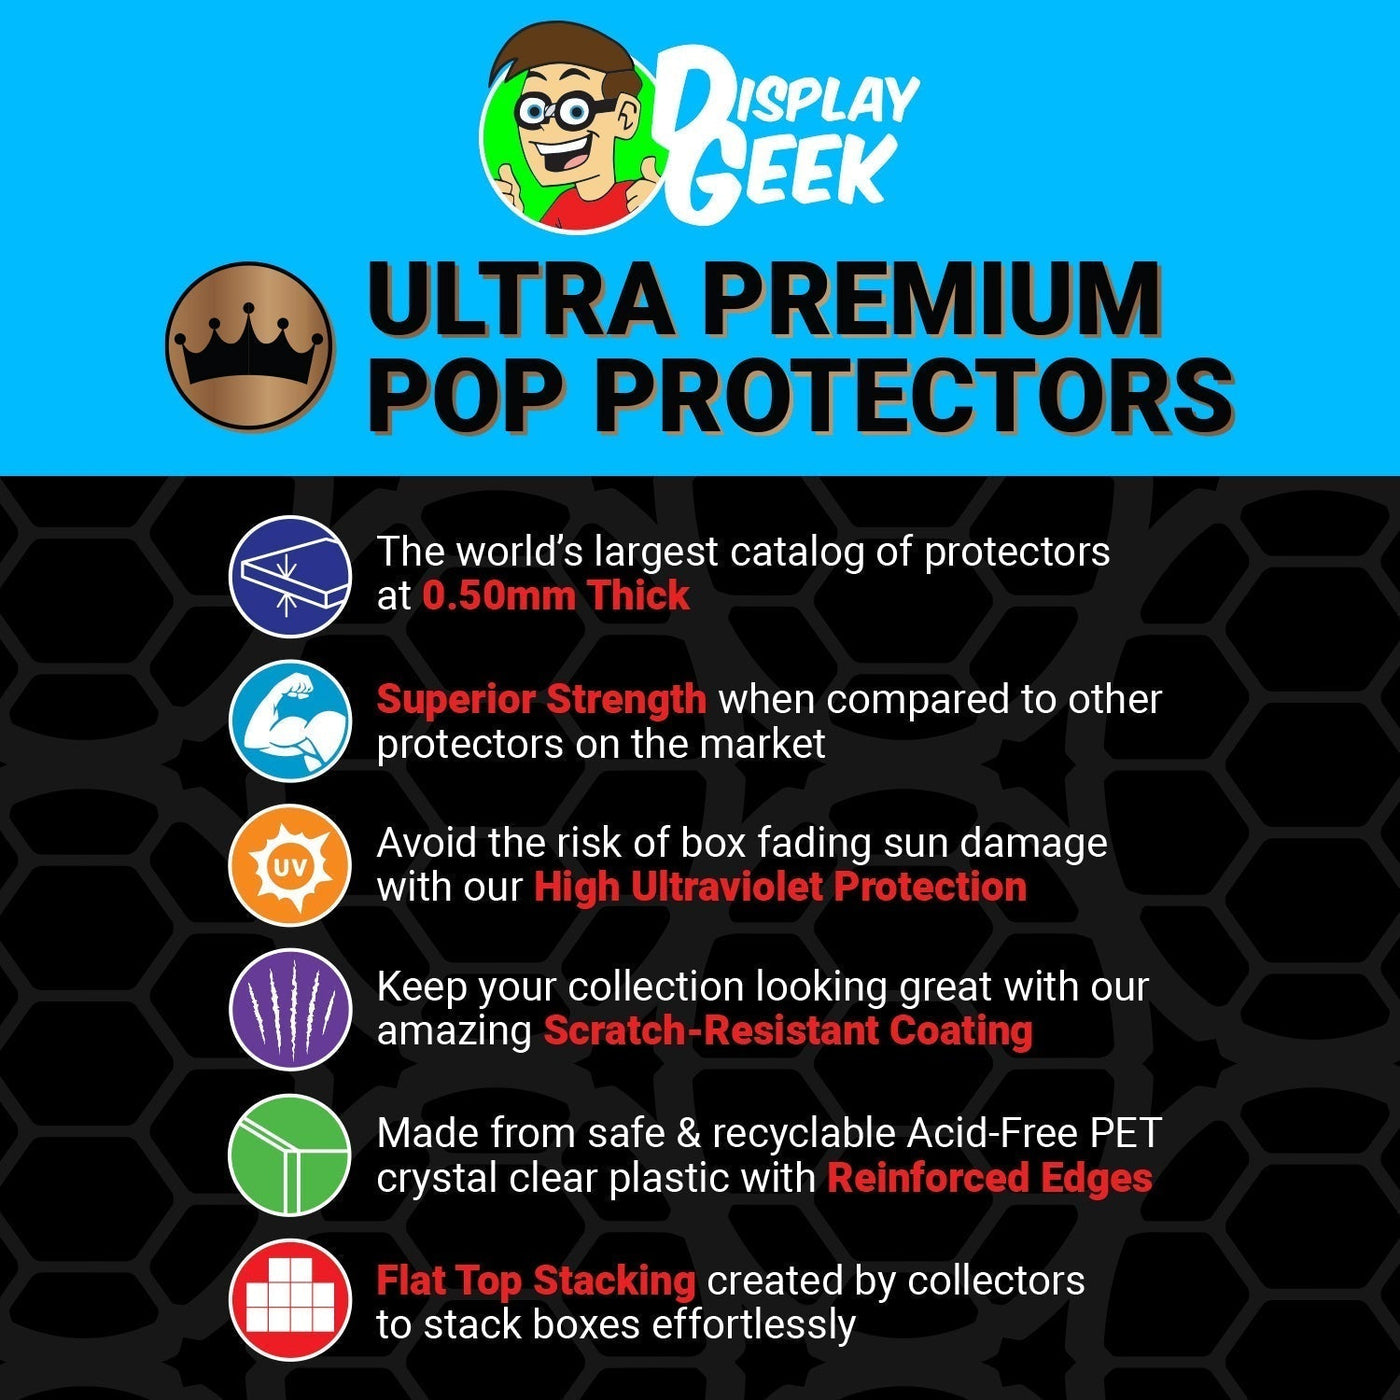 Pop Protector for 6 inch Baymax Armored #112 Super Funko Pop on The Protector Guide App by Display Geek